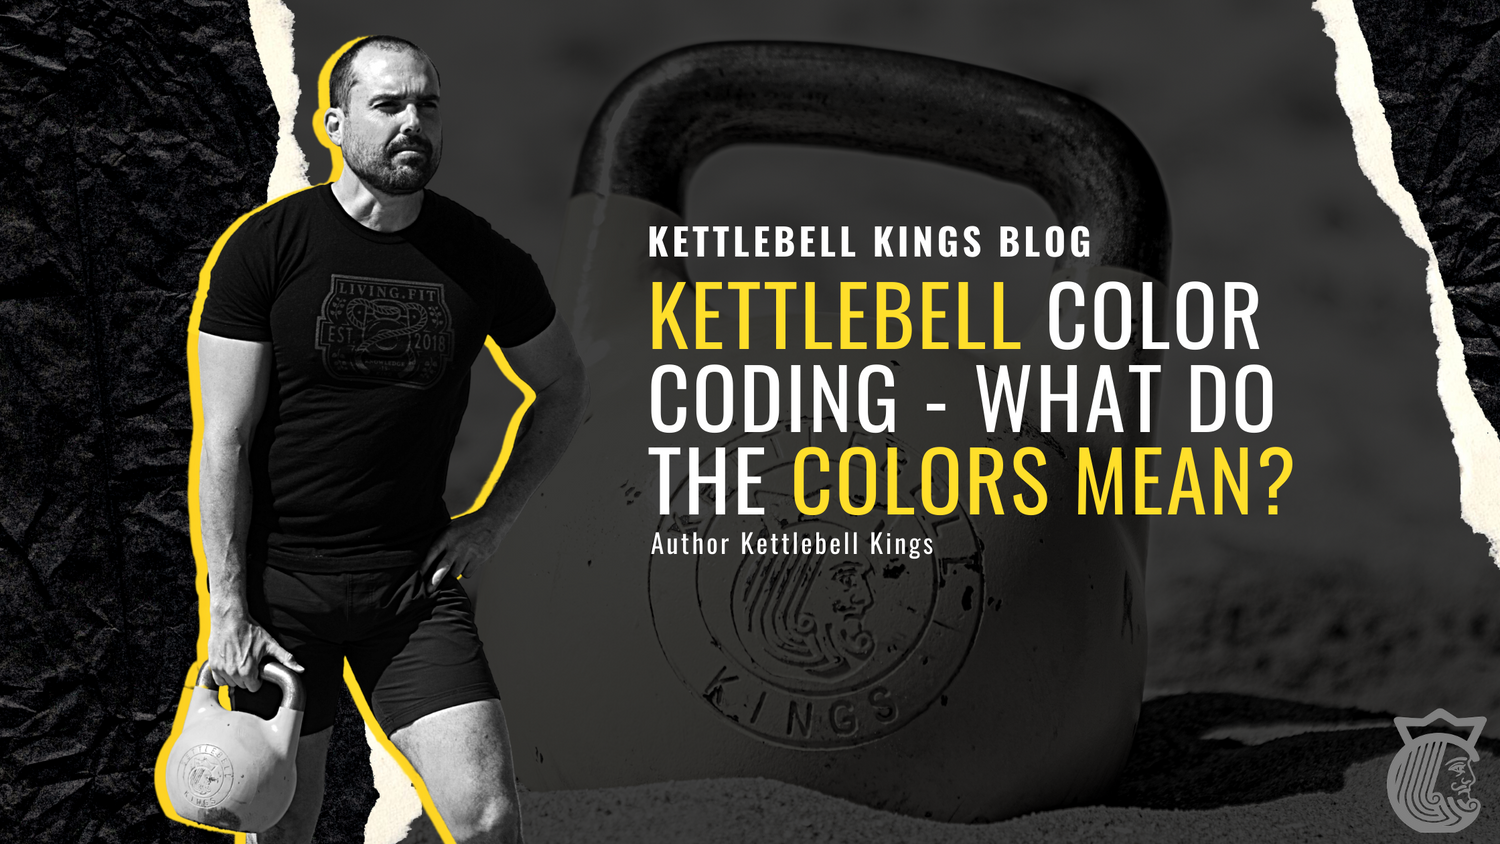 Kettlebell Color Coding - What Do The Colors Mean?